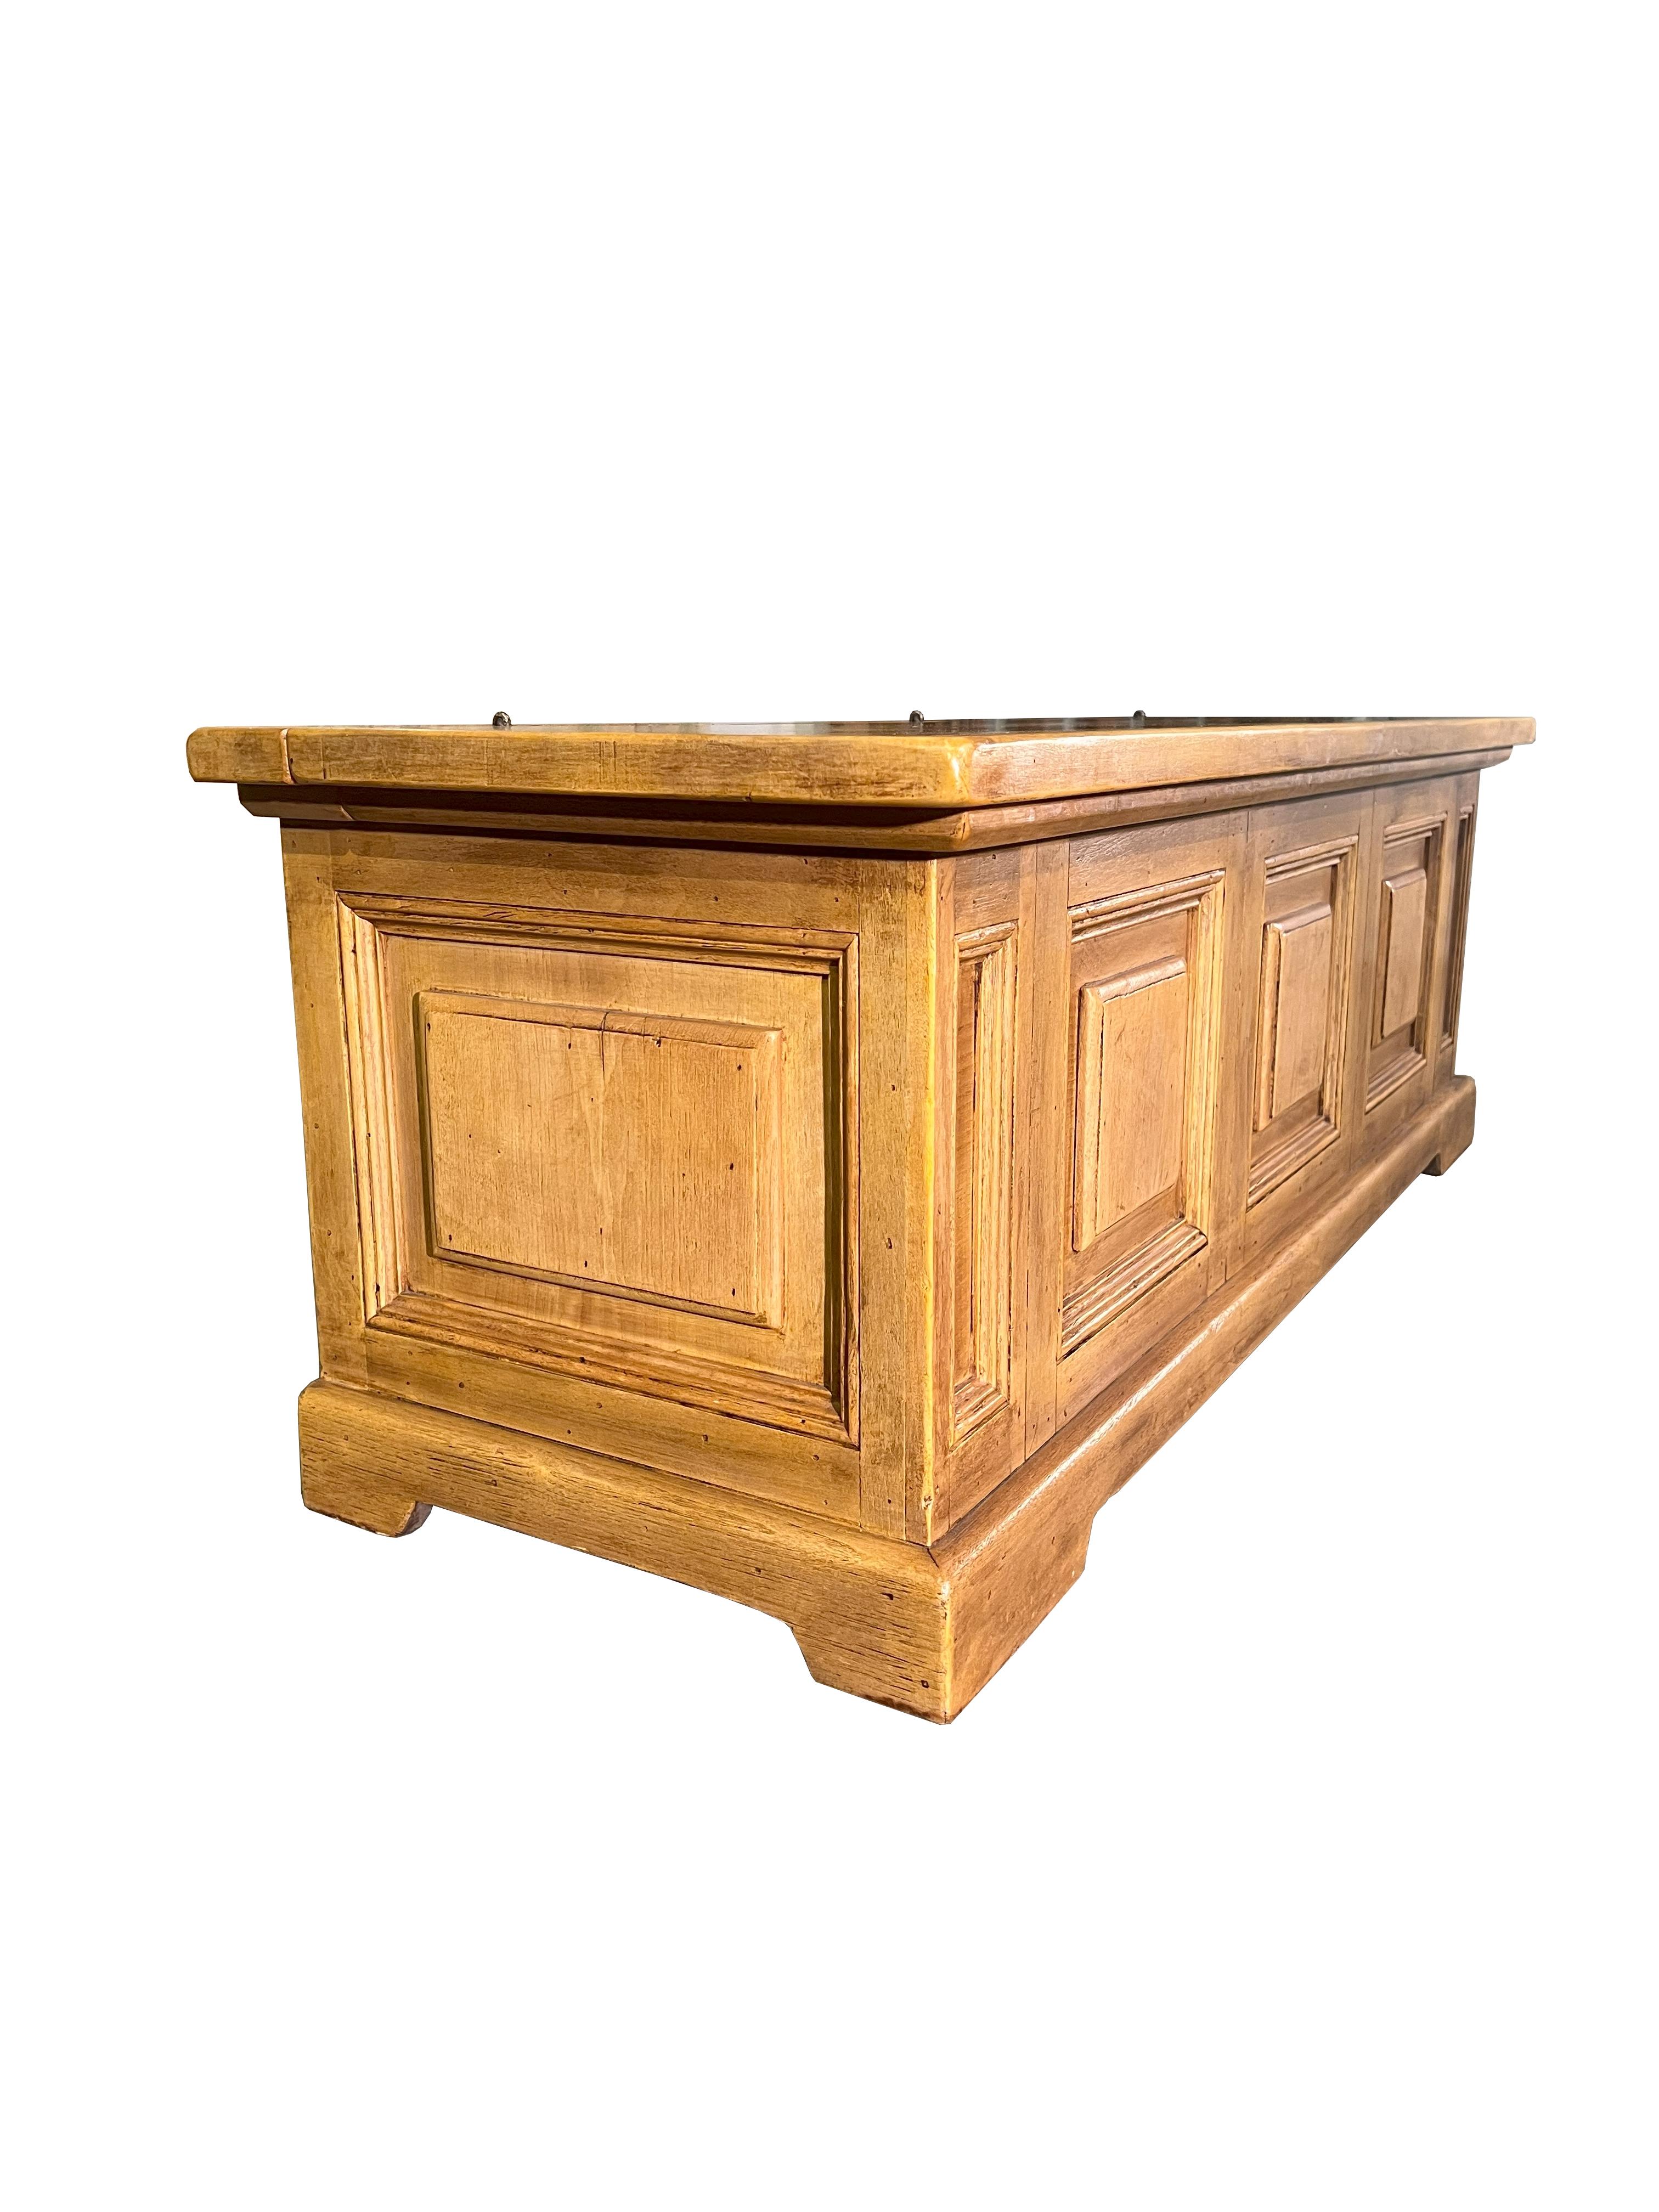 Italian Reproduction Blonde Walnut Trunk  In Good Condition For Sale In Encinitas, CA